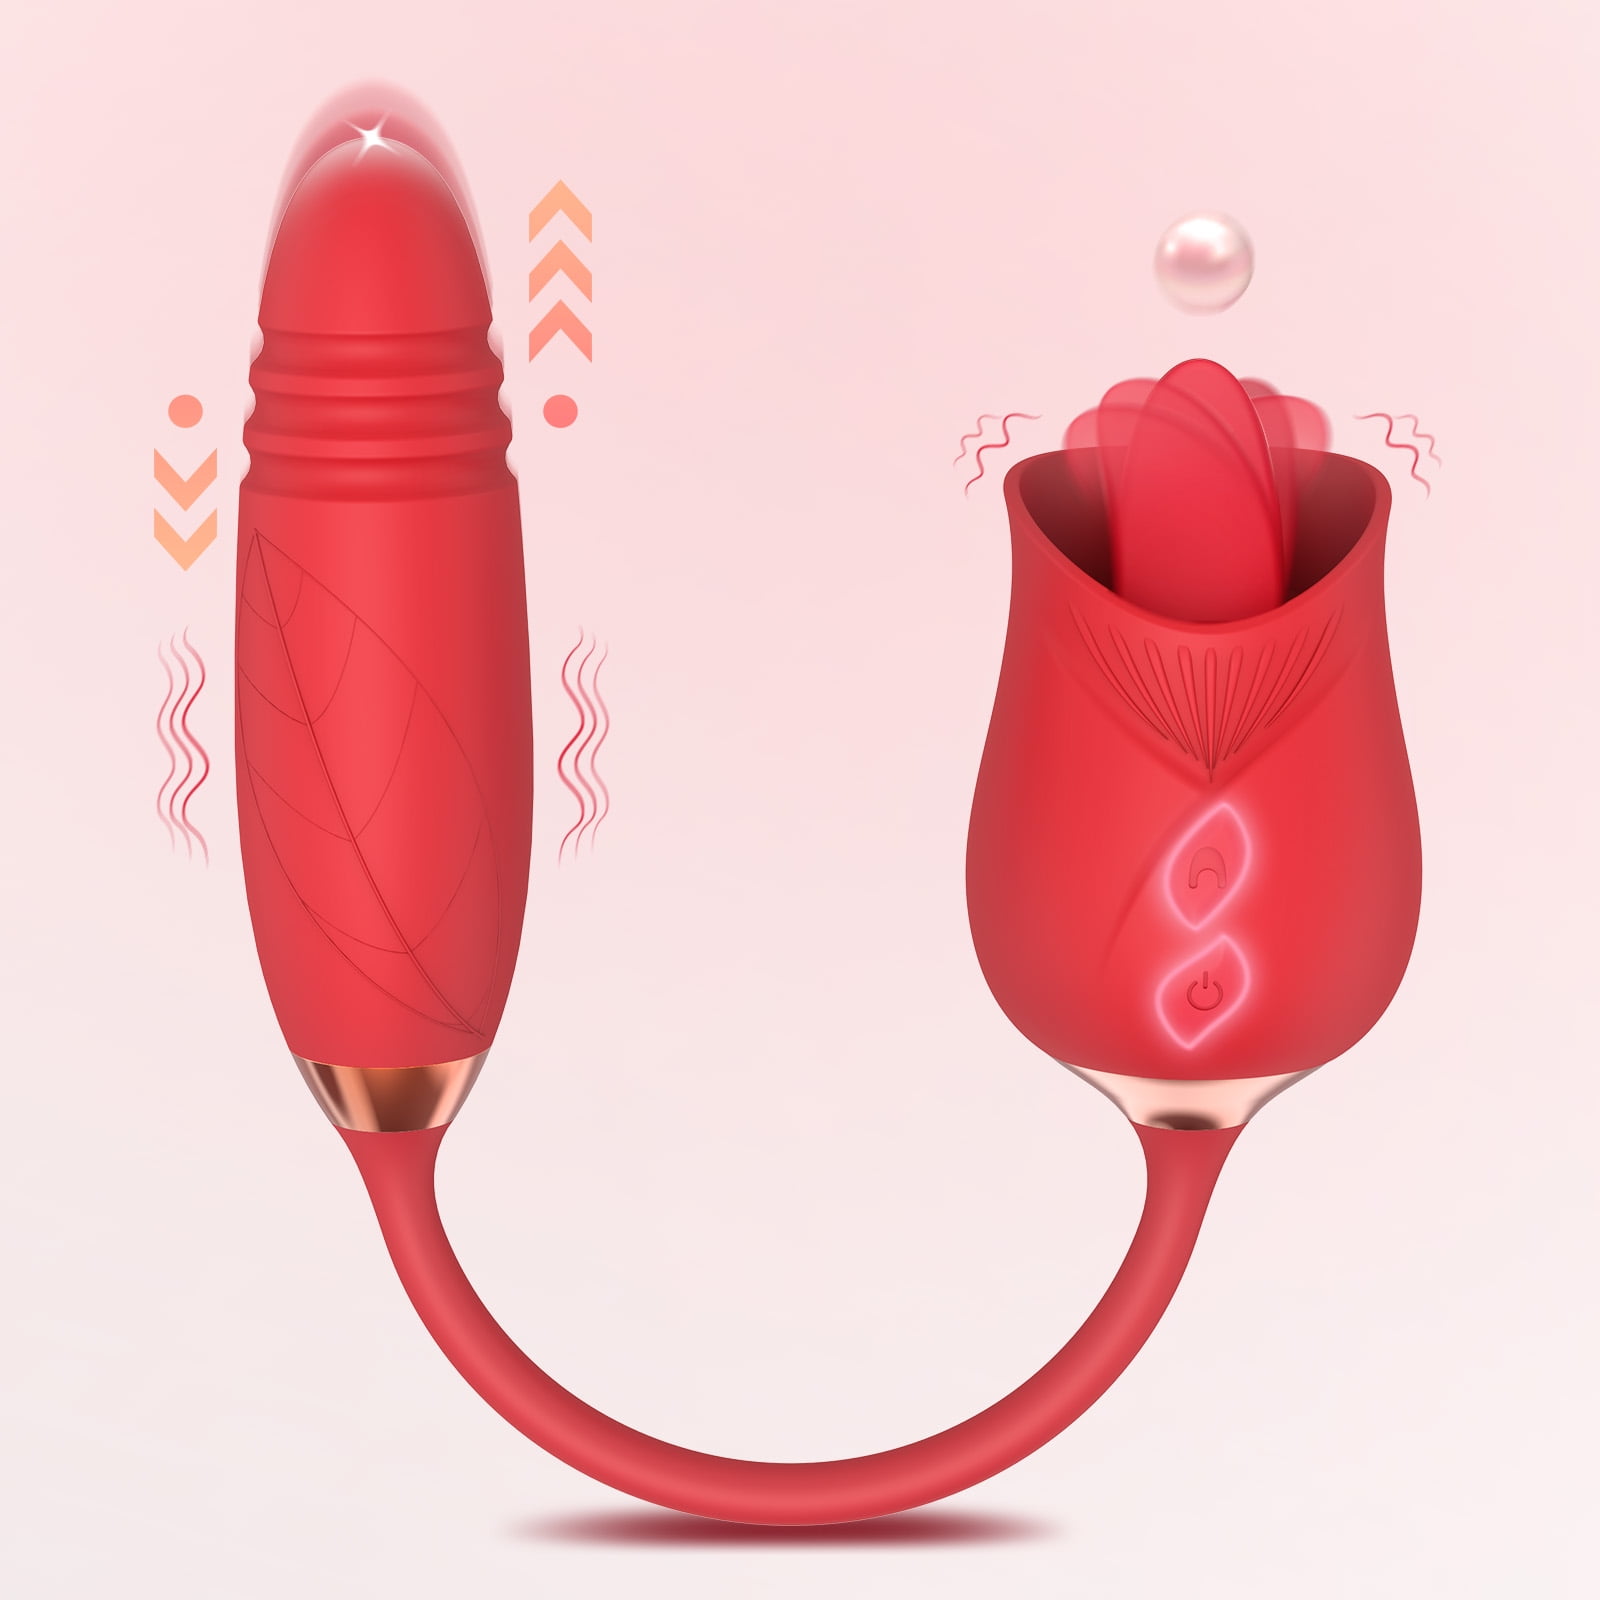 Rose Sex Toys for Women - 2 in 1 Adult Rose Sex Stimulator Vibrator Dildo for Nipple G Spot, Butt Plug for Woman Couples Pleasure(Red)